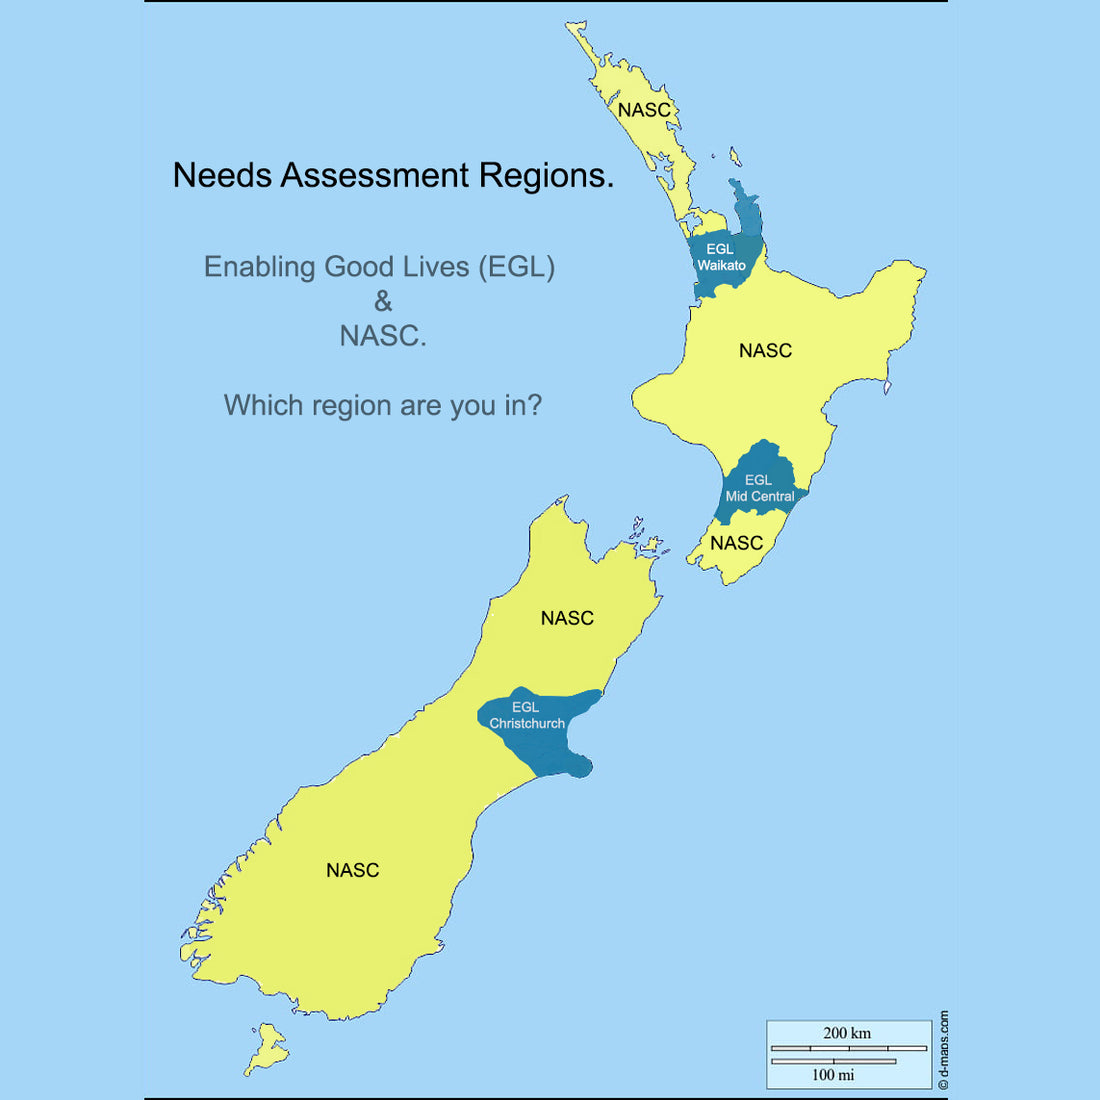 Enabling Good Lives or NASC- Which region are you in? What is the difference?